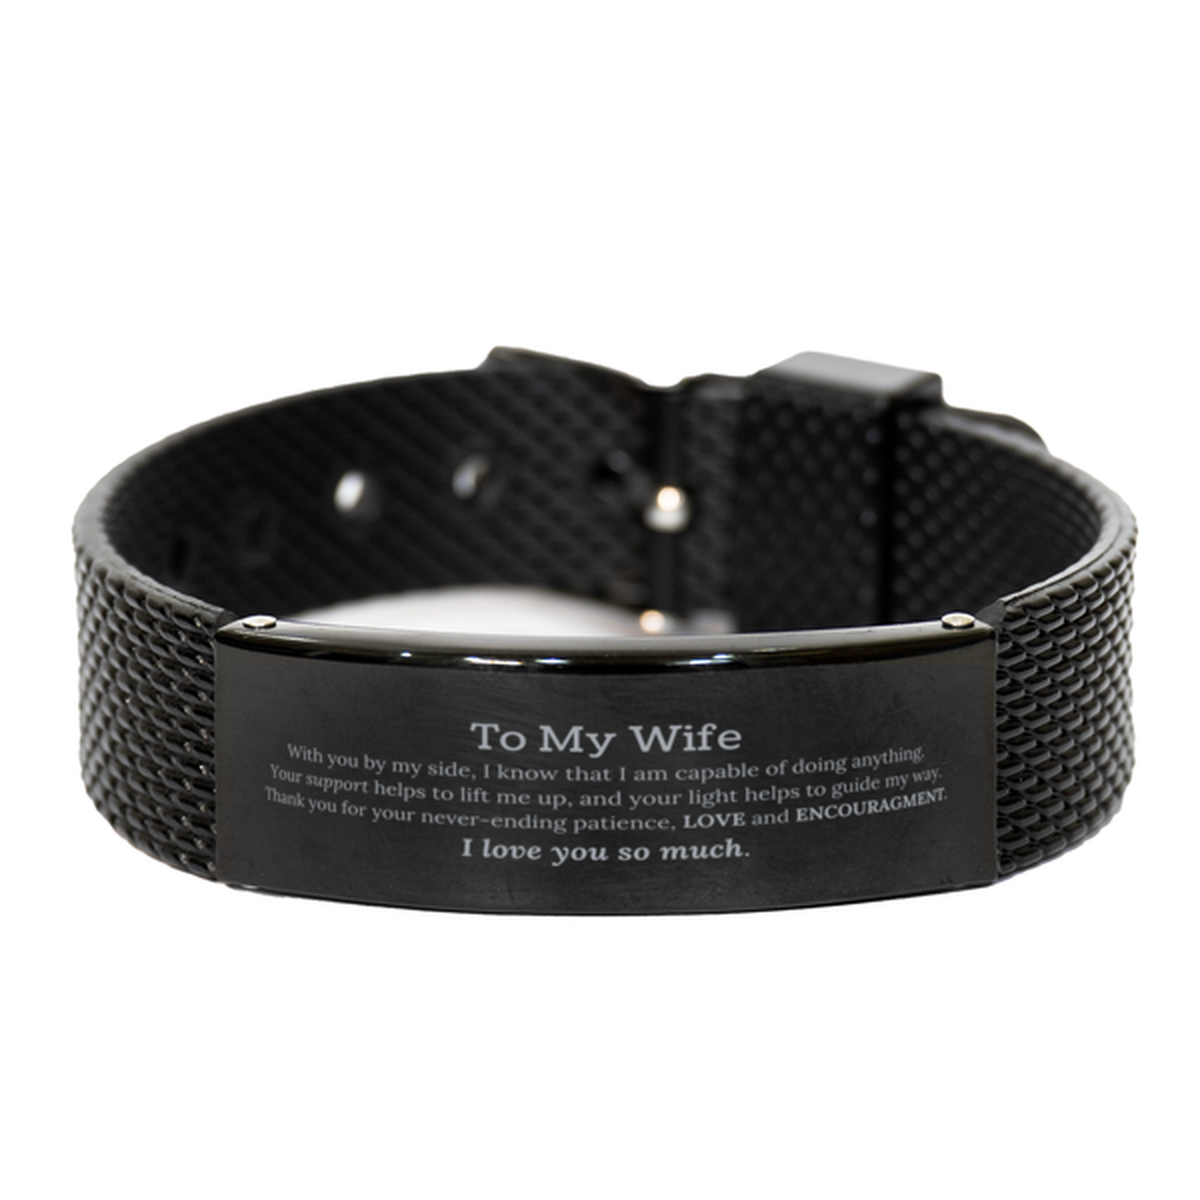 Appreciation Wife Black Shark Mesh Bracelet Gifts, To My Wife Birthday Christmas Wedding Keepsake Gifts for Wife With you by my side, I know that I am capable of doing anything. I love you so much